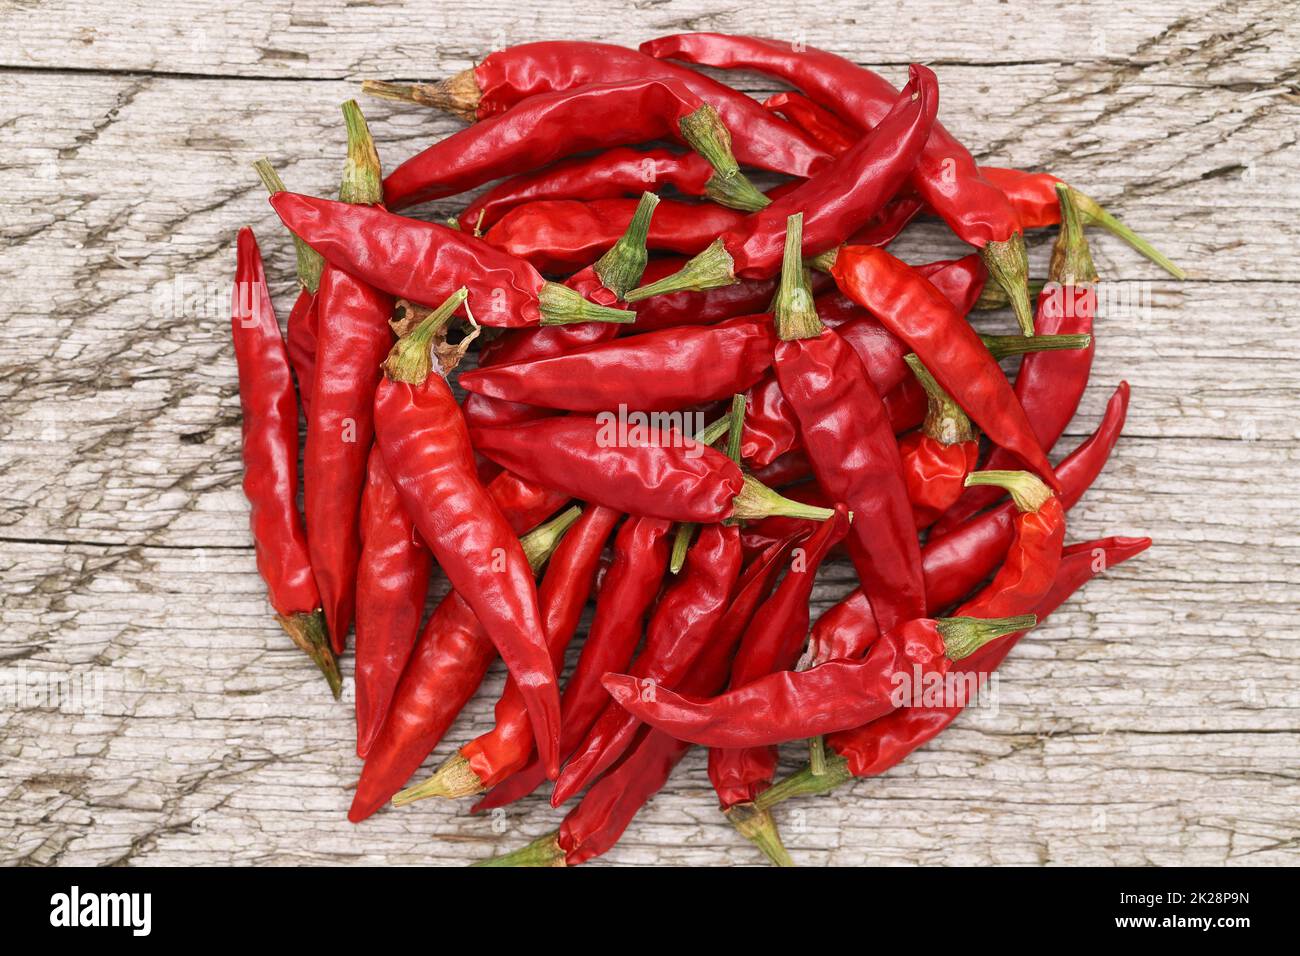 stack of red chili pepper plants on grungy wooden background Stock Photo